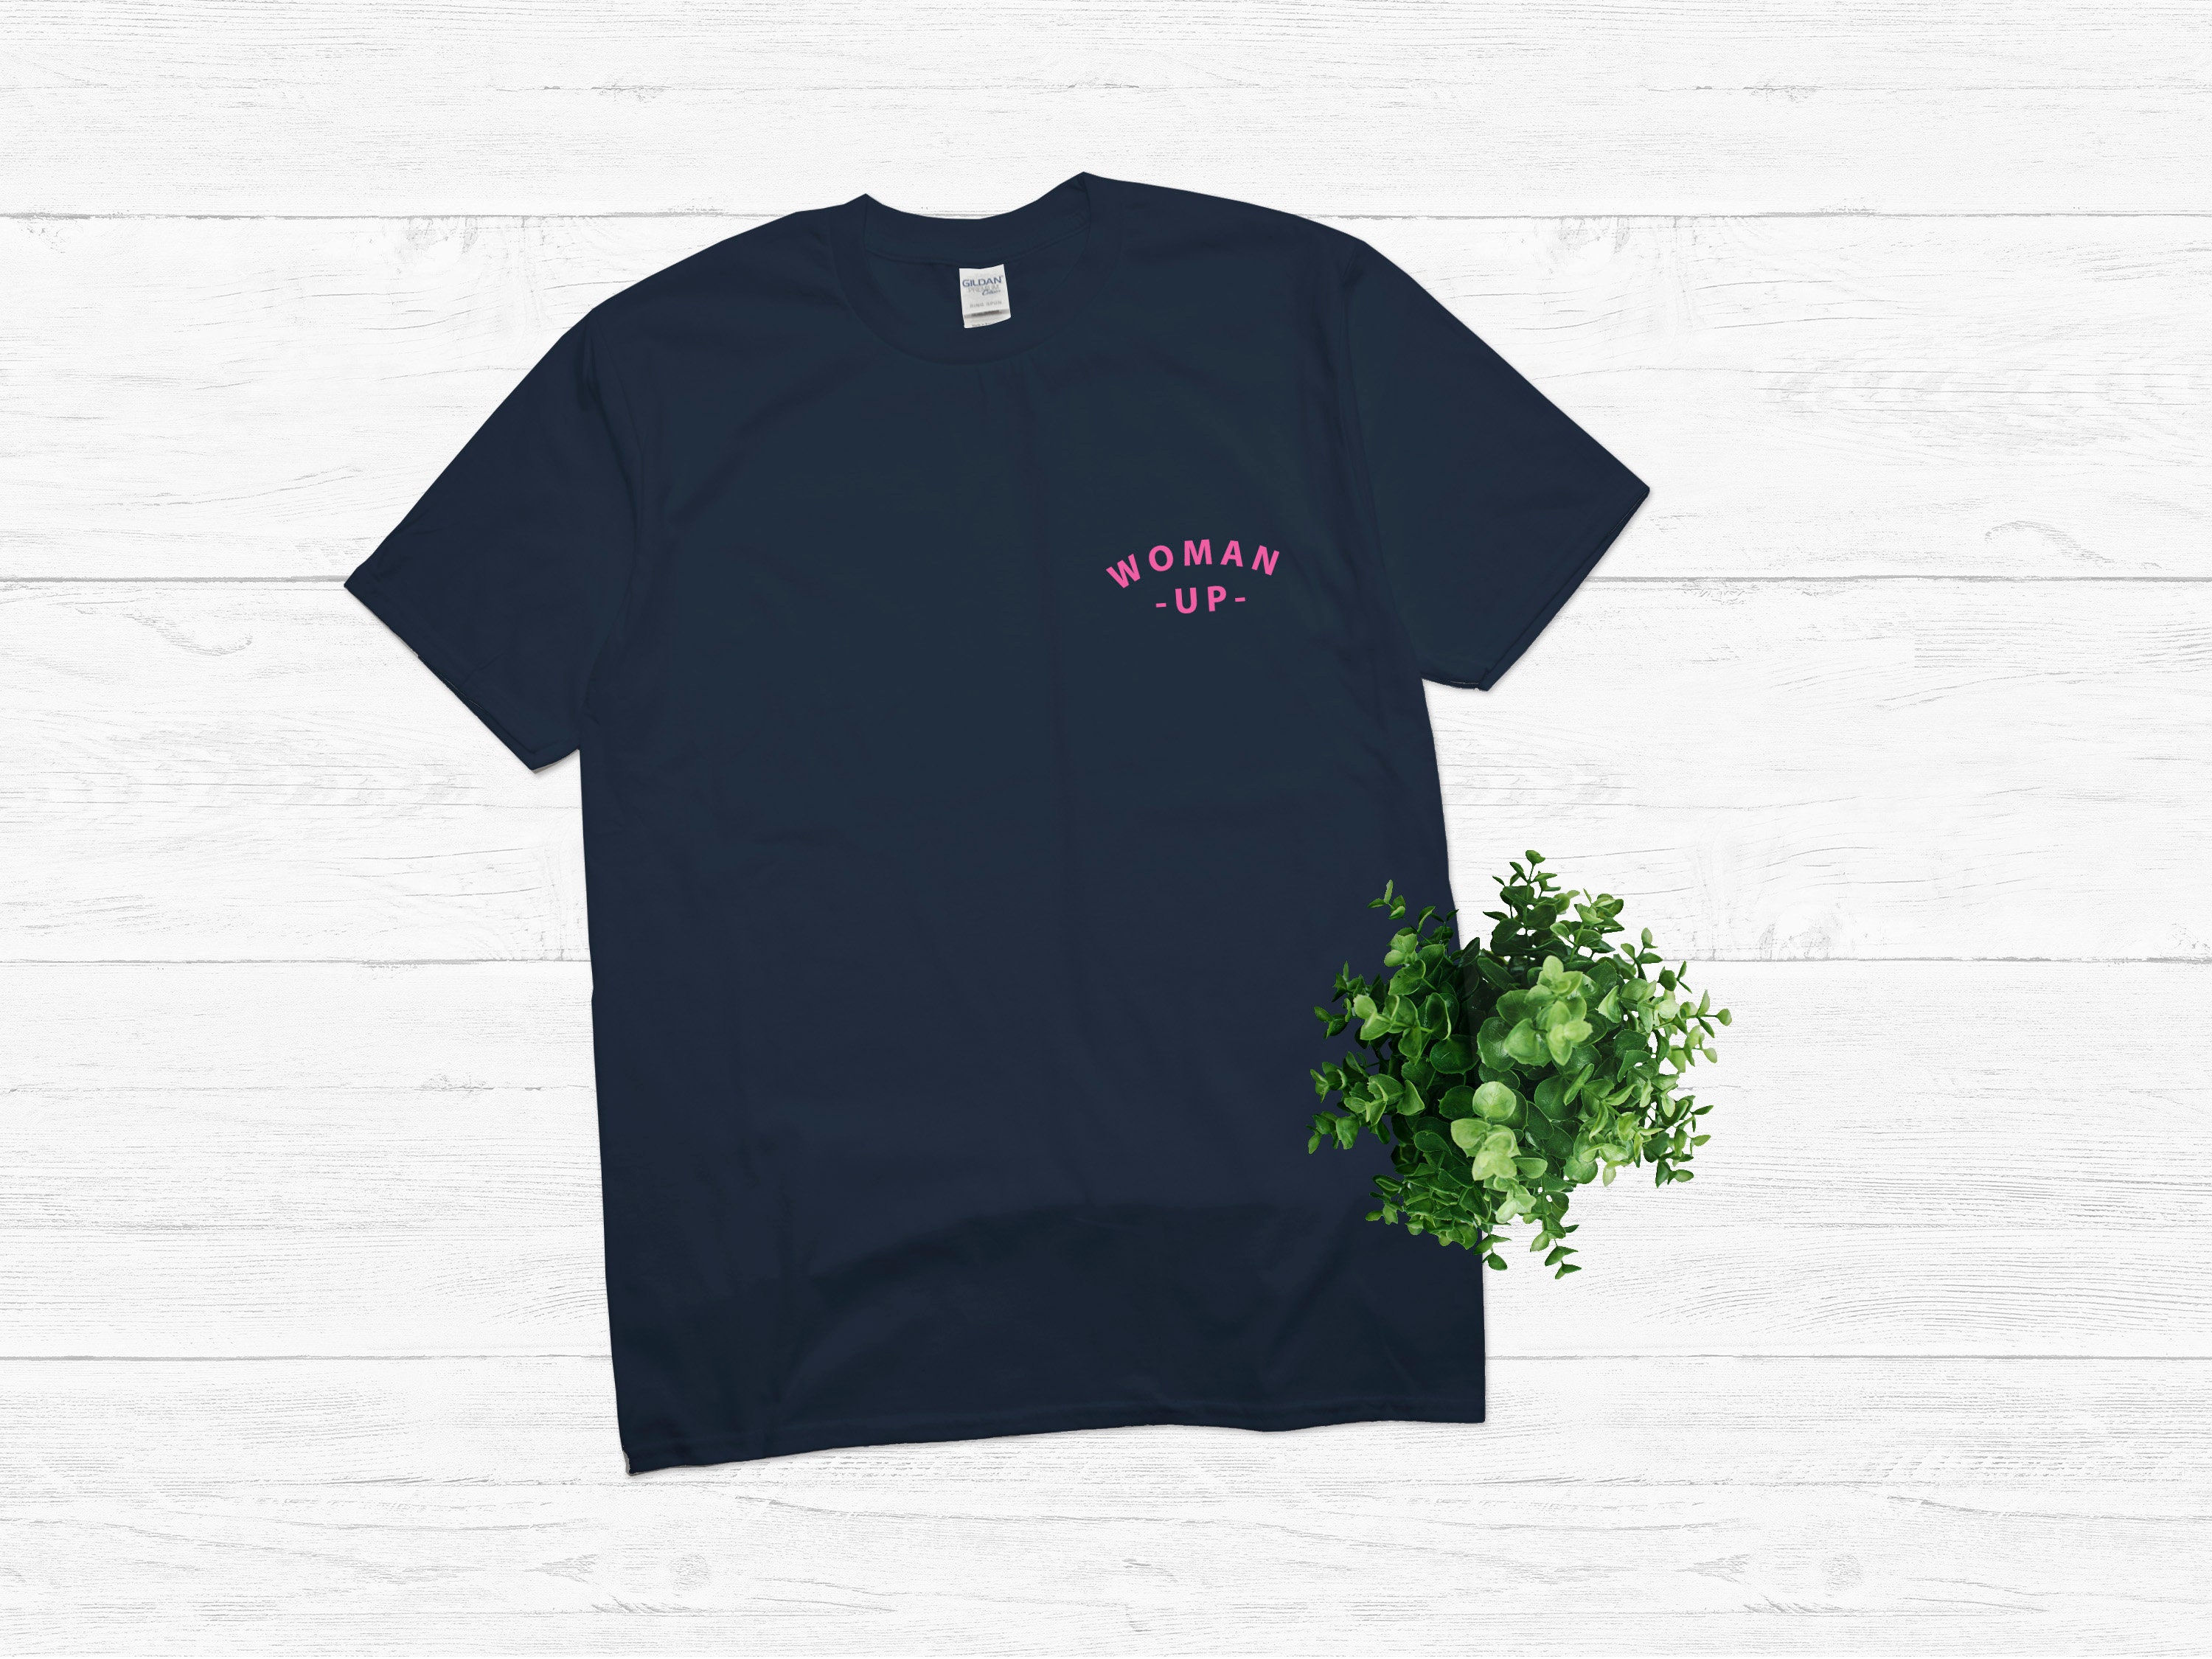 Discover Woman Up, Woman Up Pocket Size Shirt, Woman Up Pocket Size T Shirt, Feminist Shirt, Perfect gift.